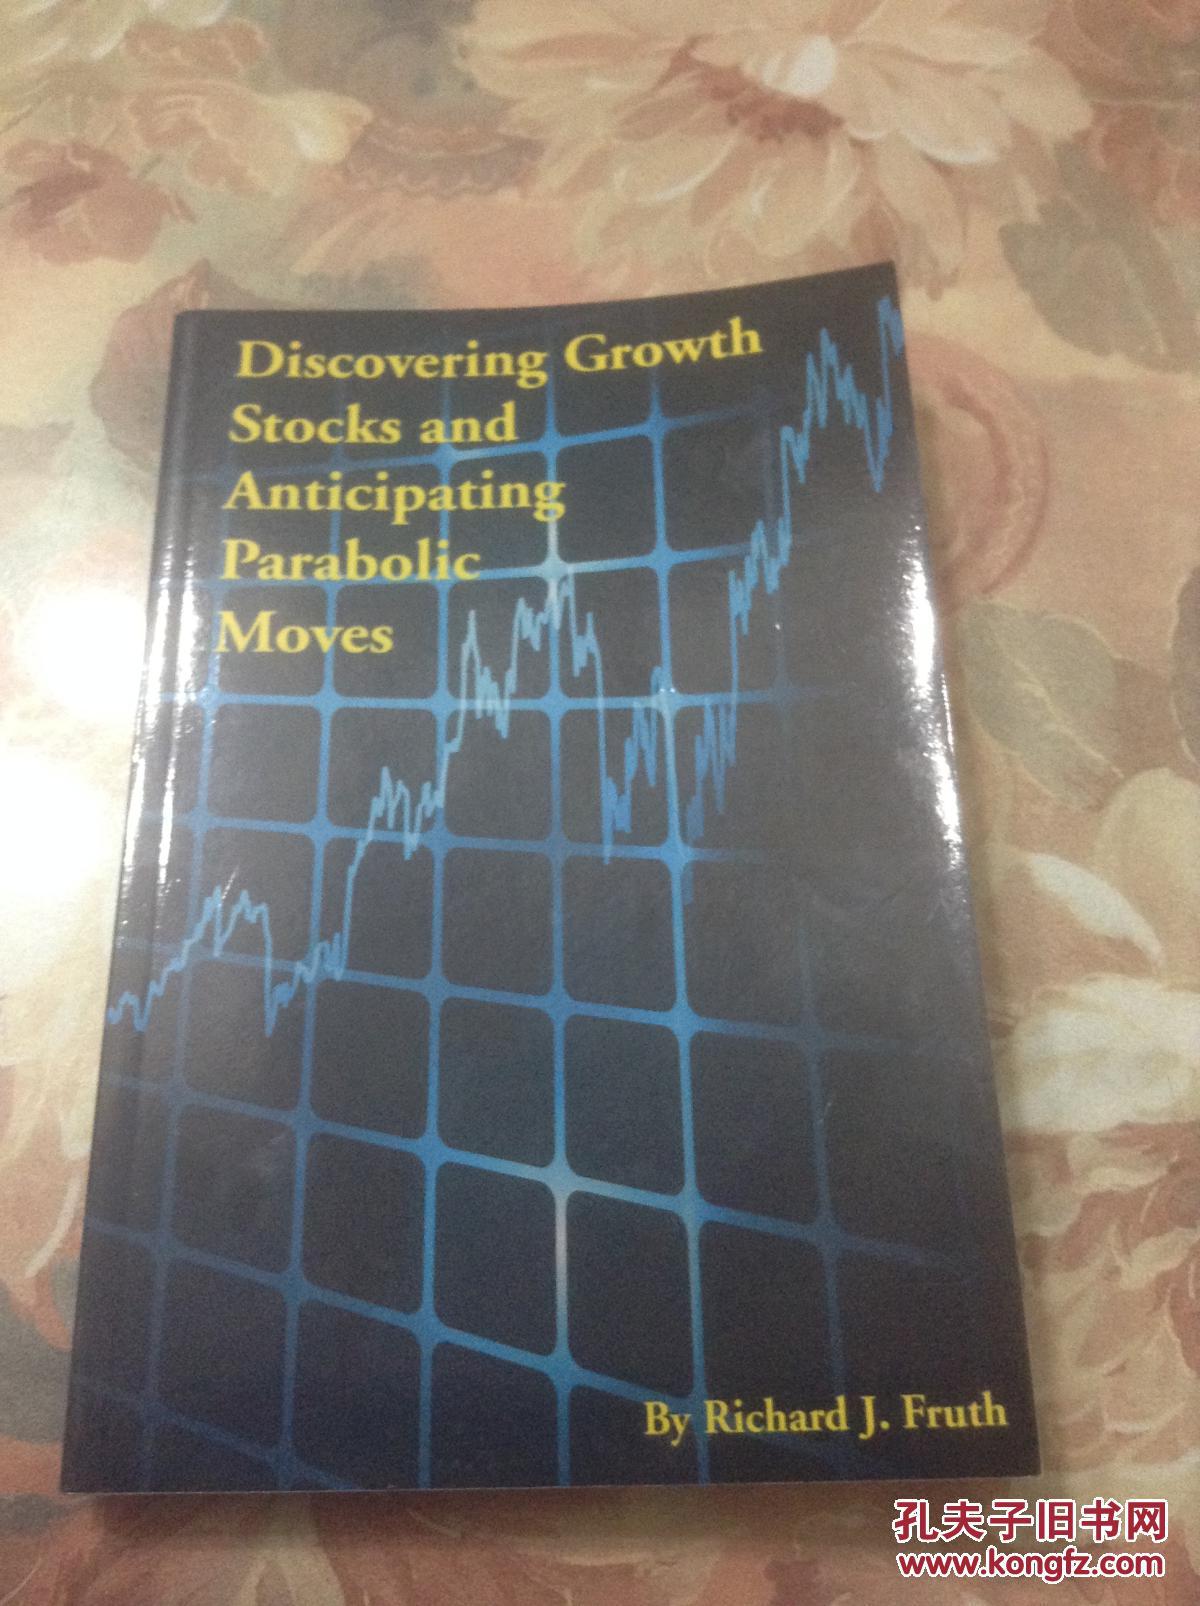 Discovering Growth Stocks and Anticipating Parabolic Moves